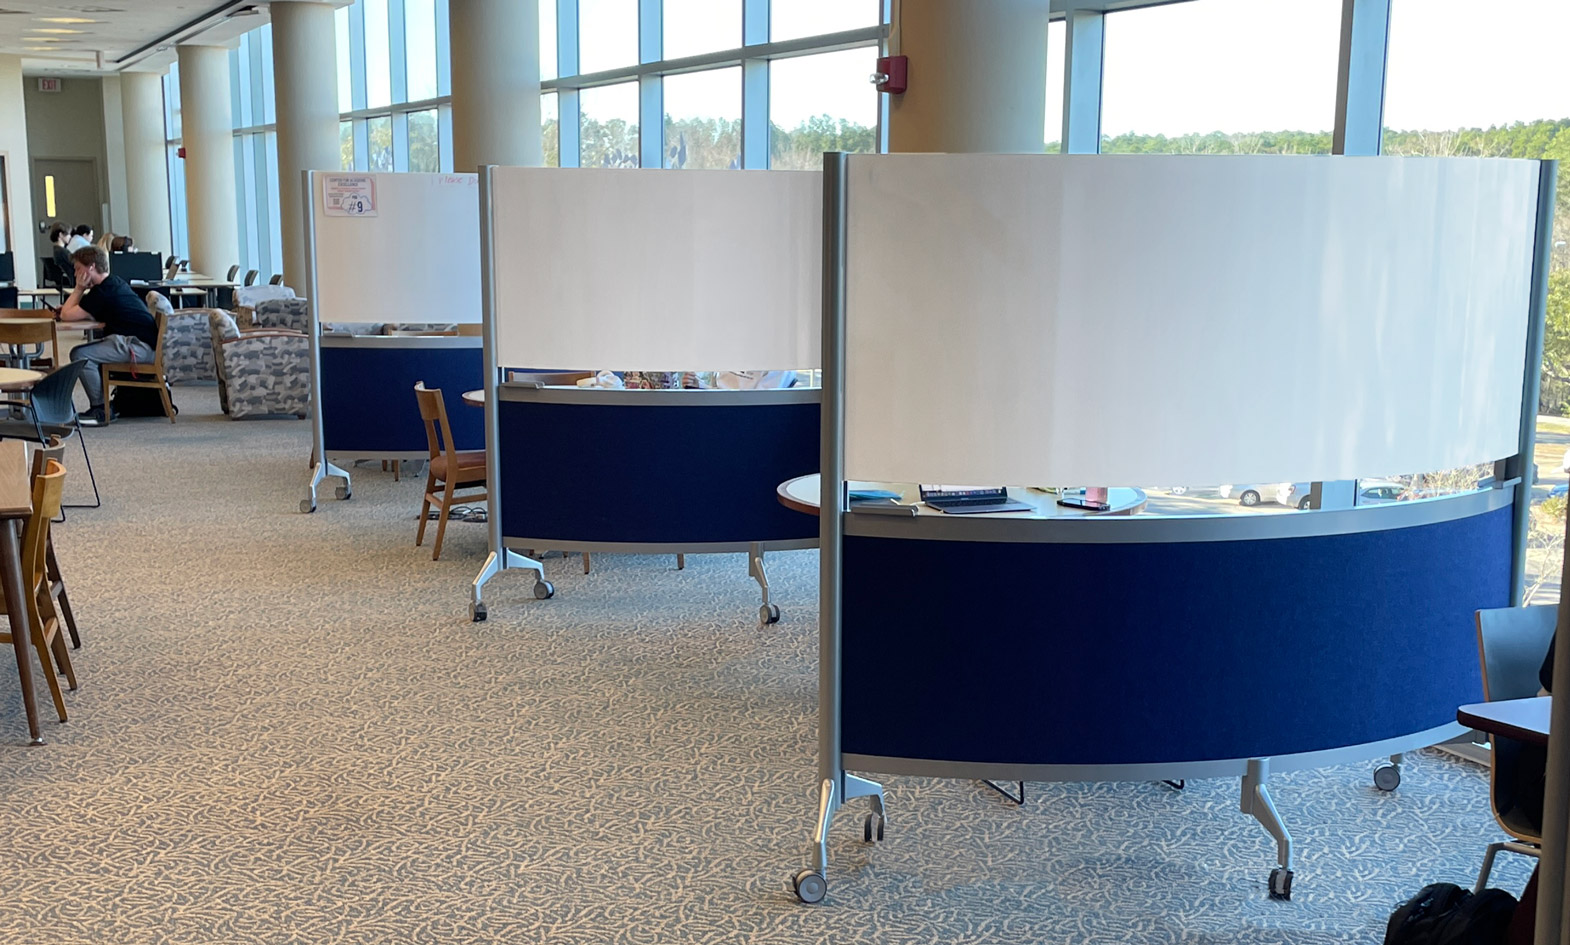 Student Success Center with curved mobile witheboards on casters for flexibility